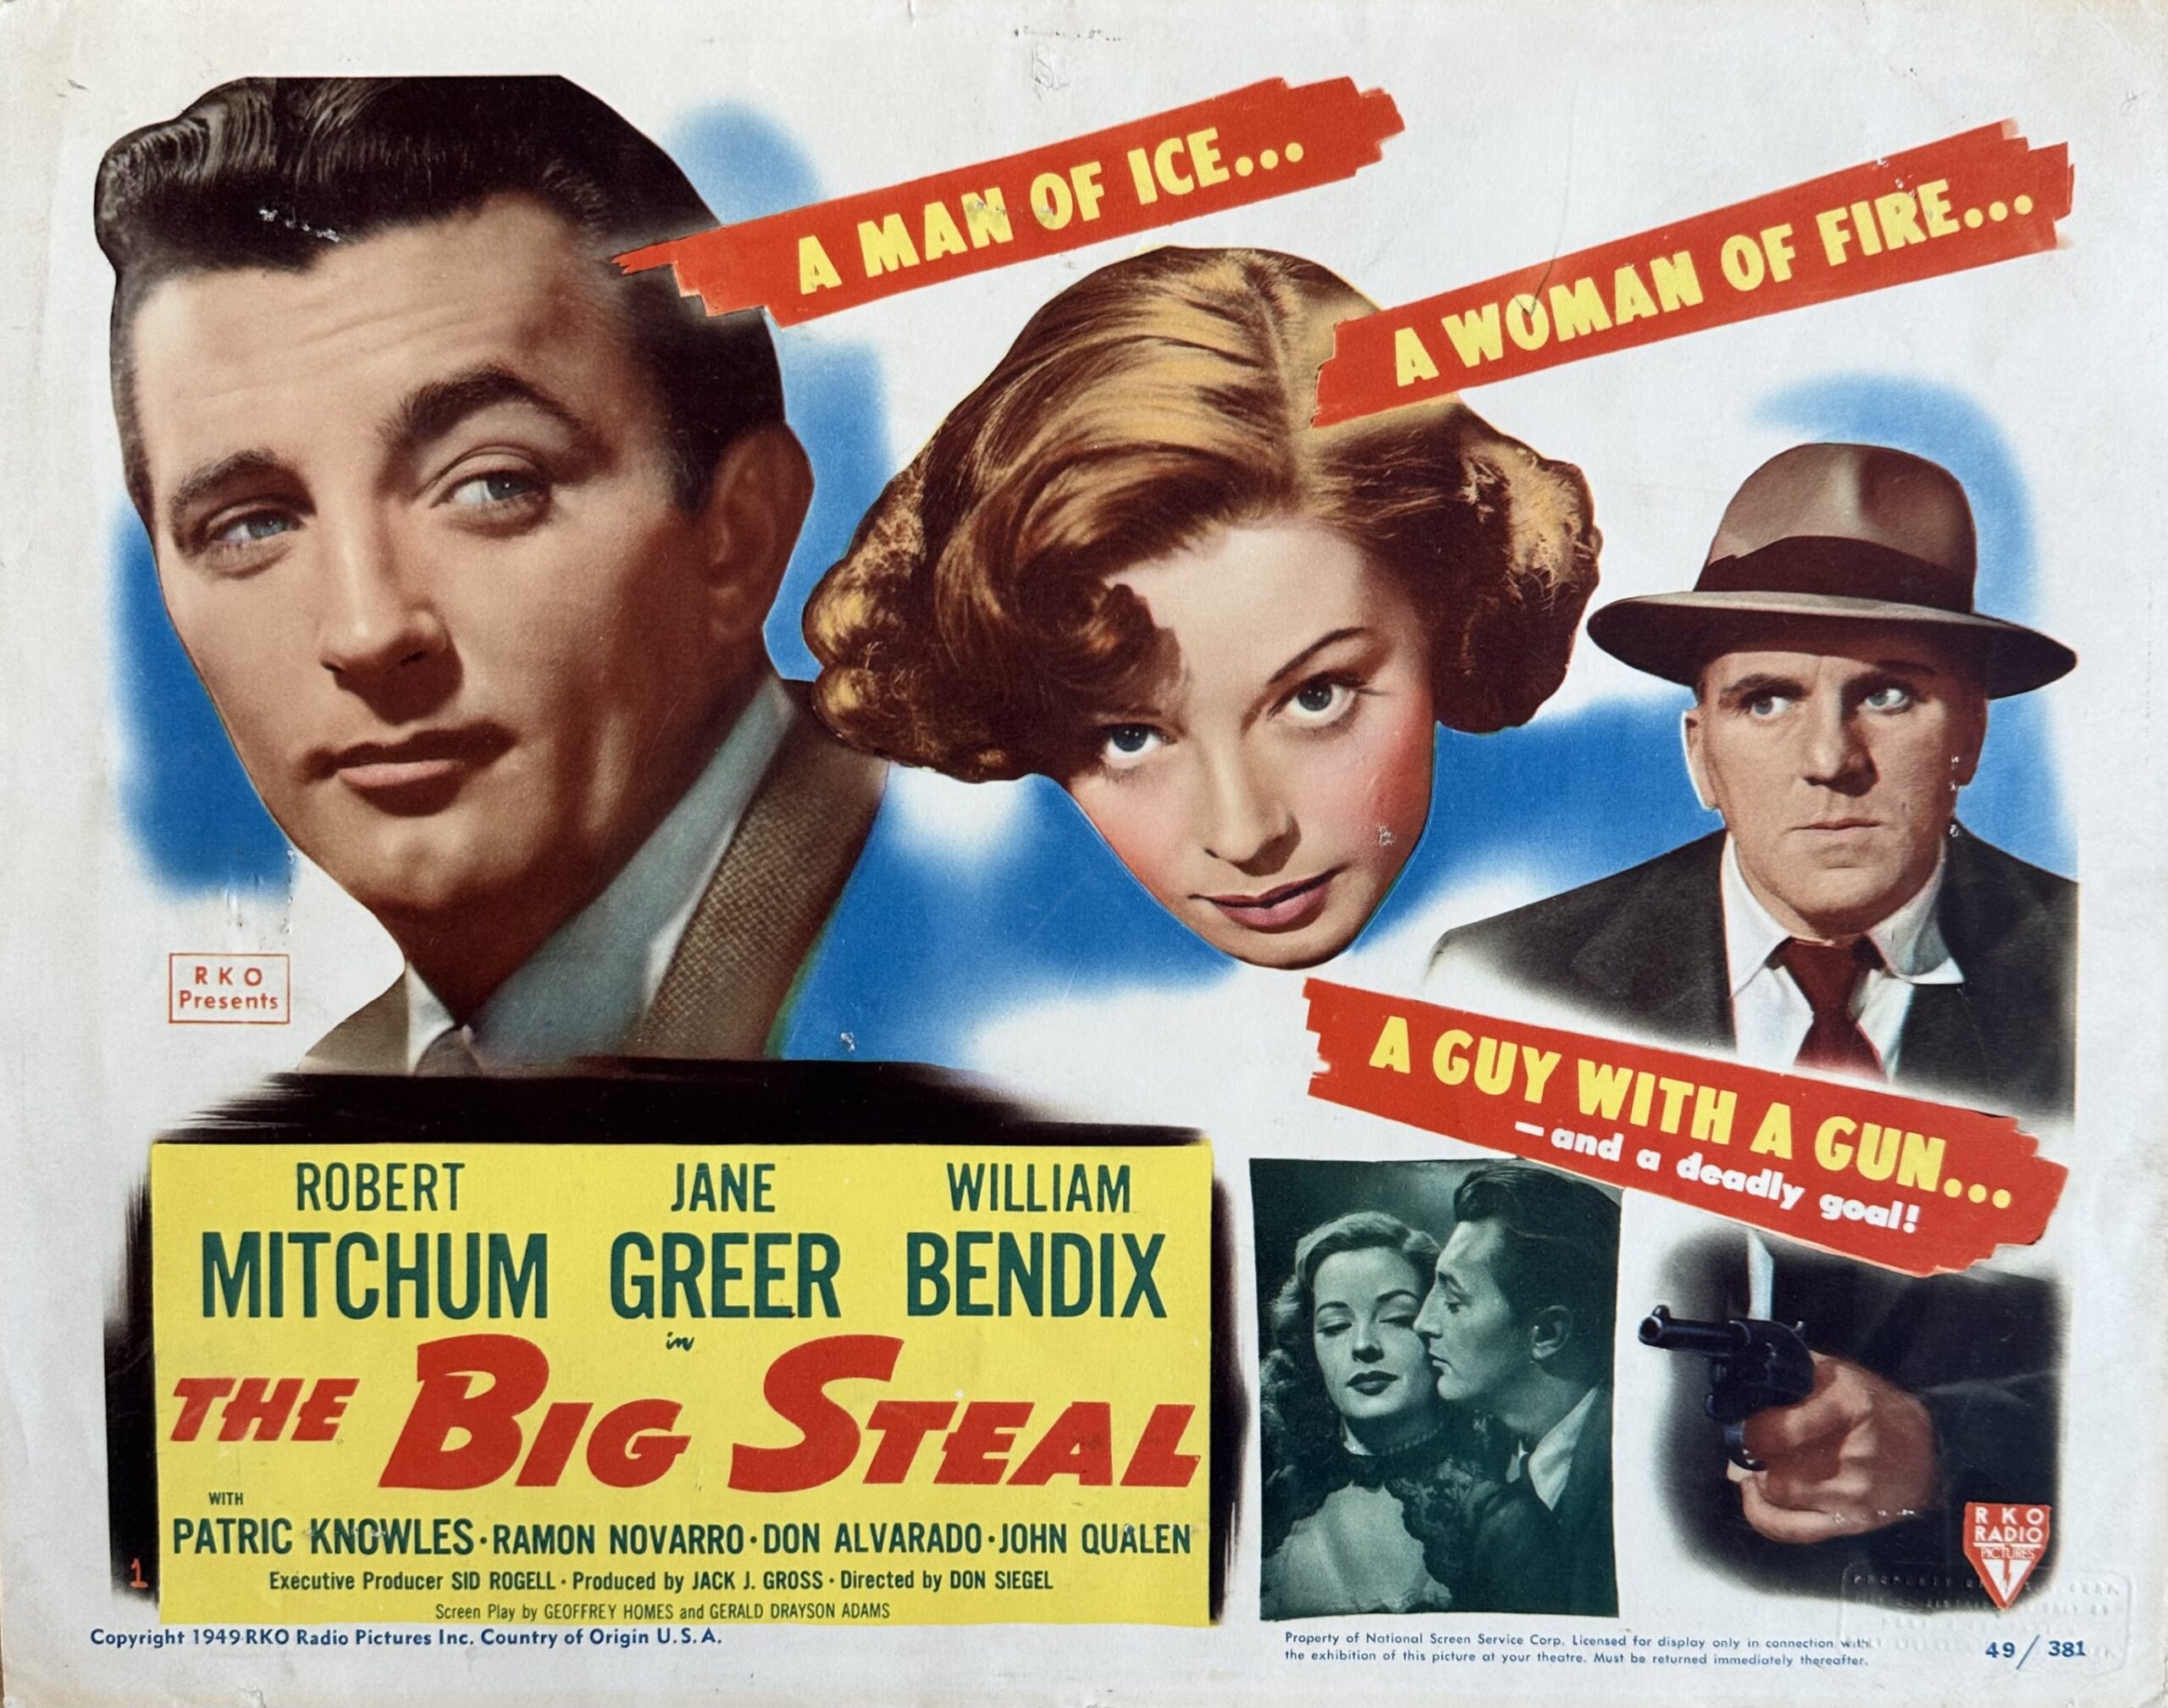 Original vintage Lobby Card movie poster for the Big Steal starring Robert Mitchum